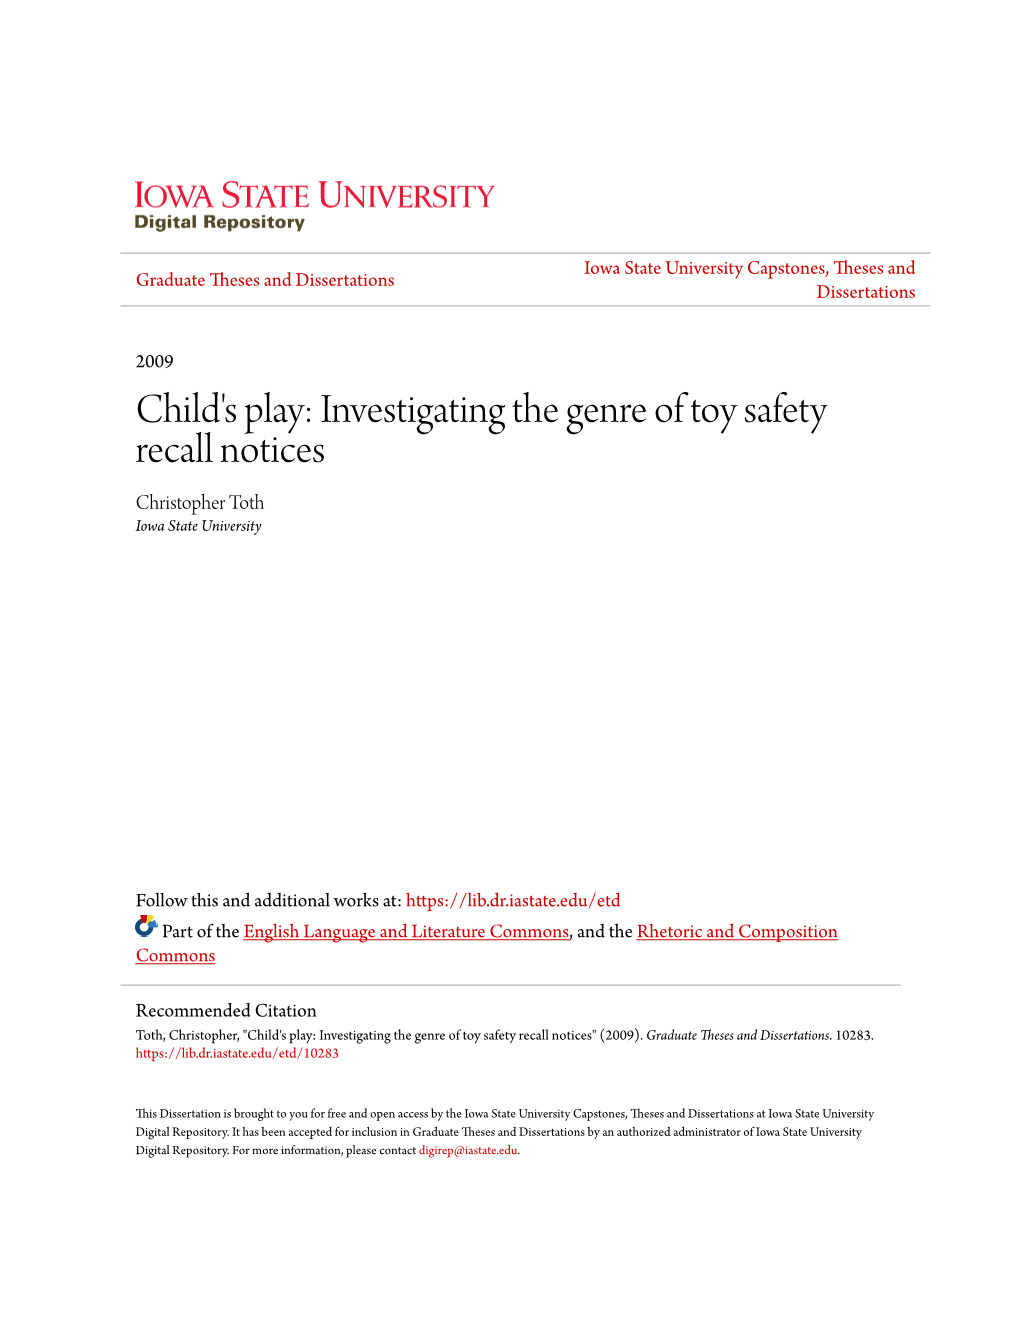 Child's Play: Investigating the Genre of Toy Safety Recall Notices Christopher Toth Iowa State University